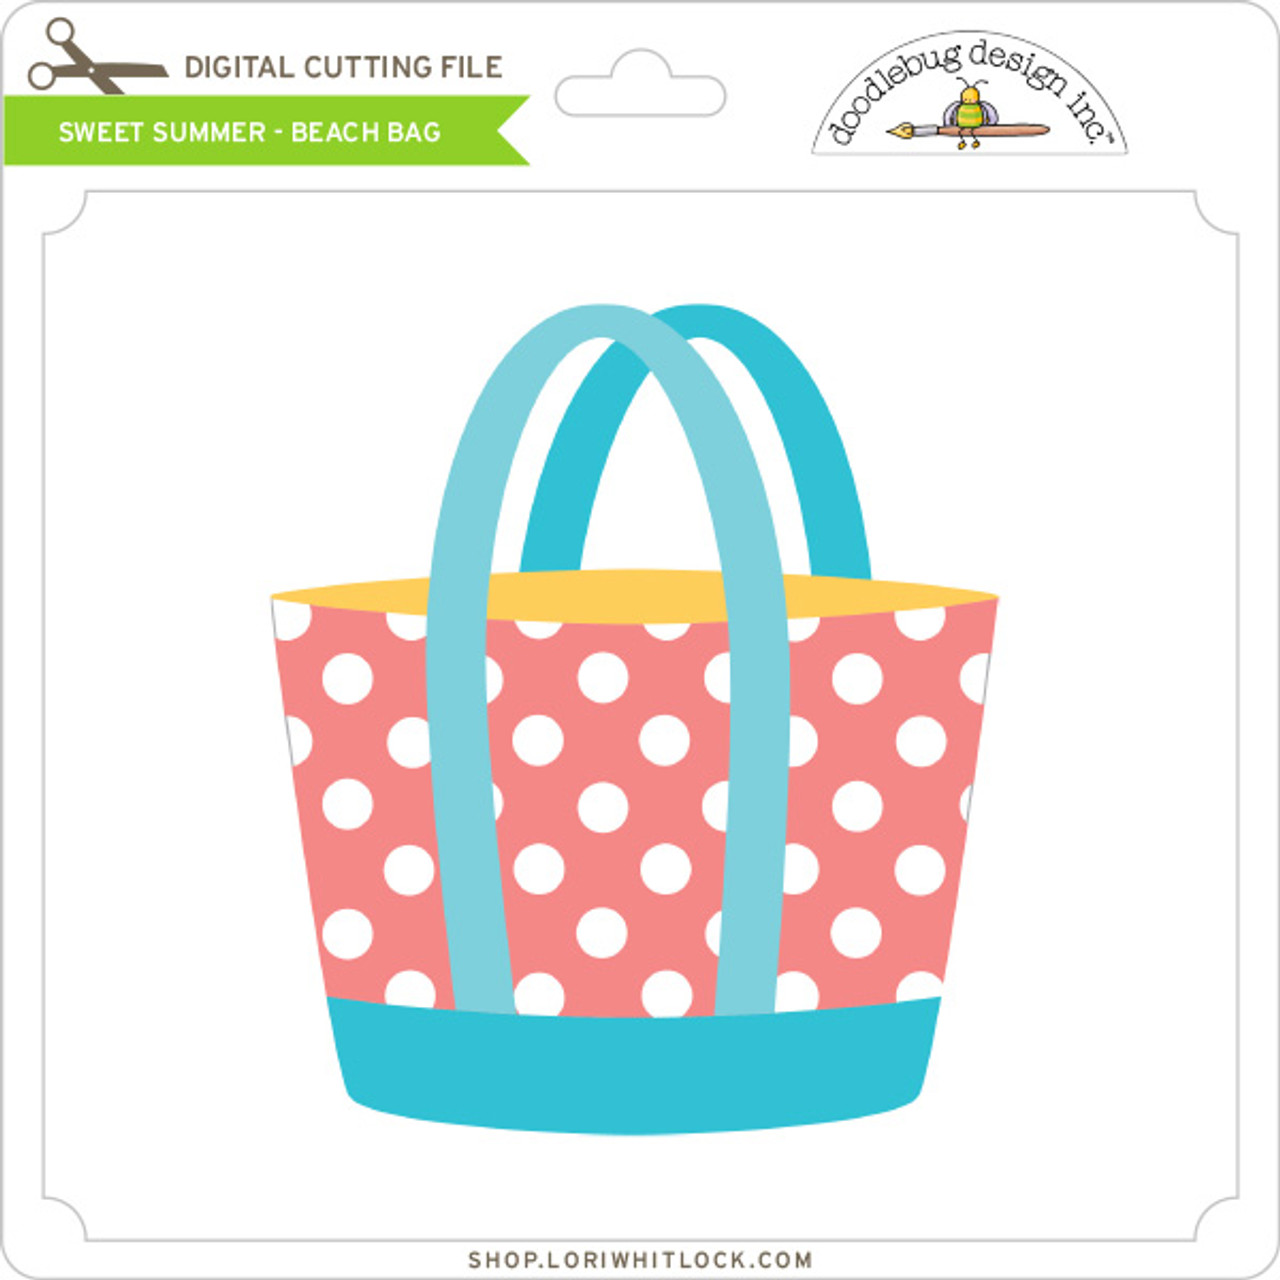 45 Doodle Shopping Bag Clipart. Personal and comercial use.